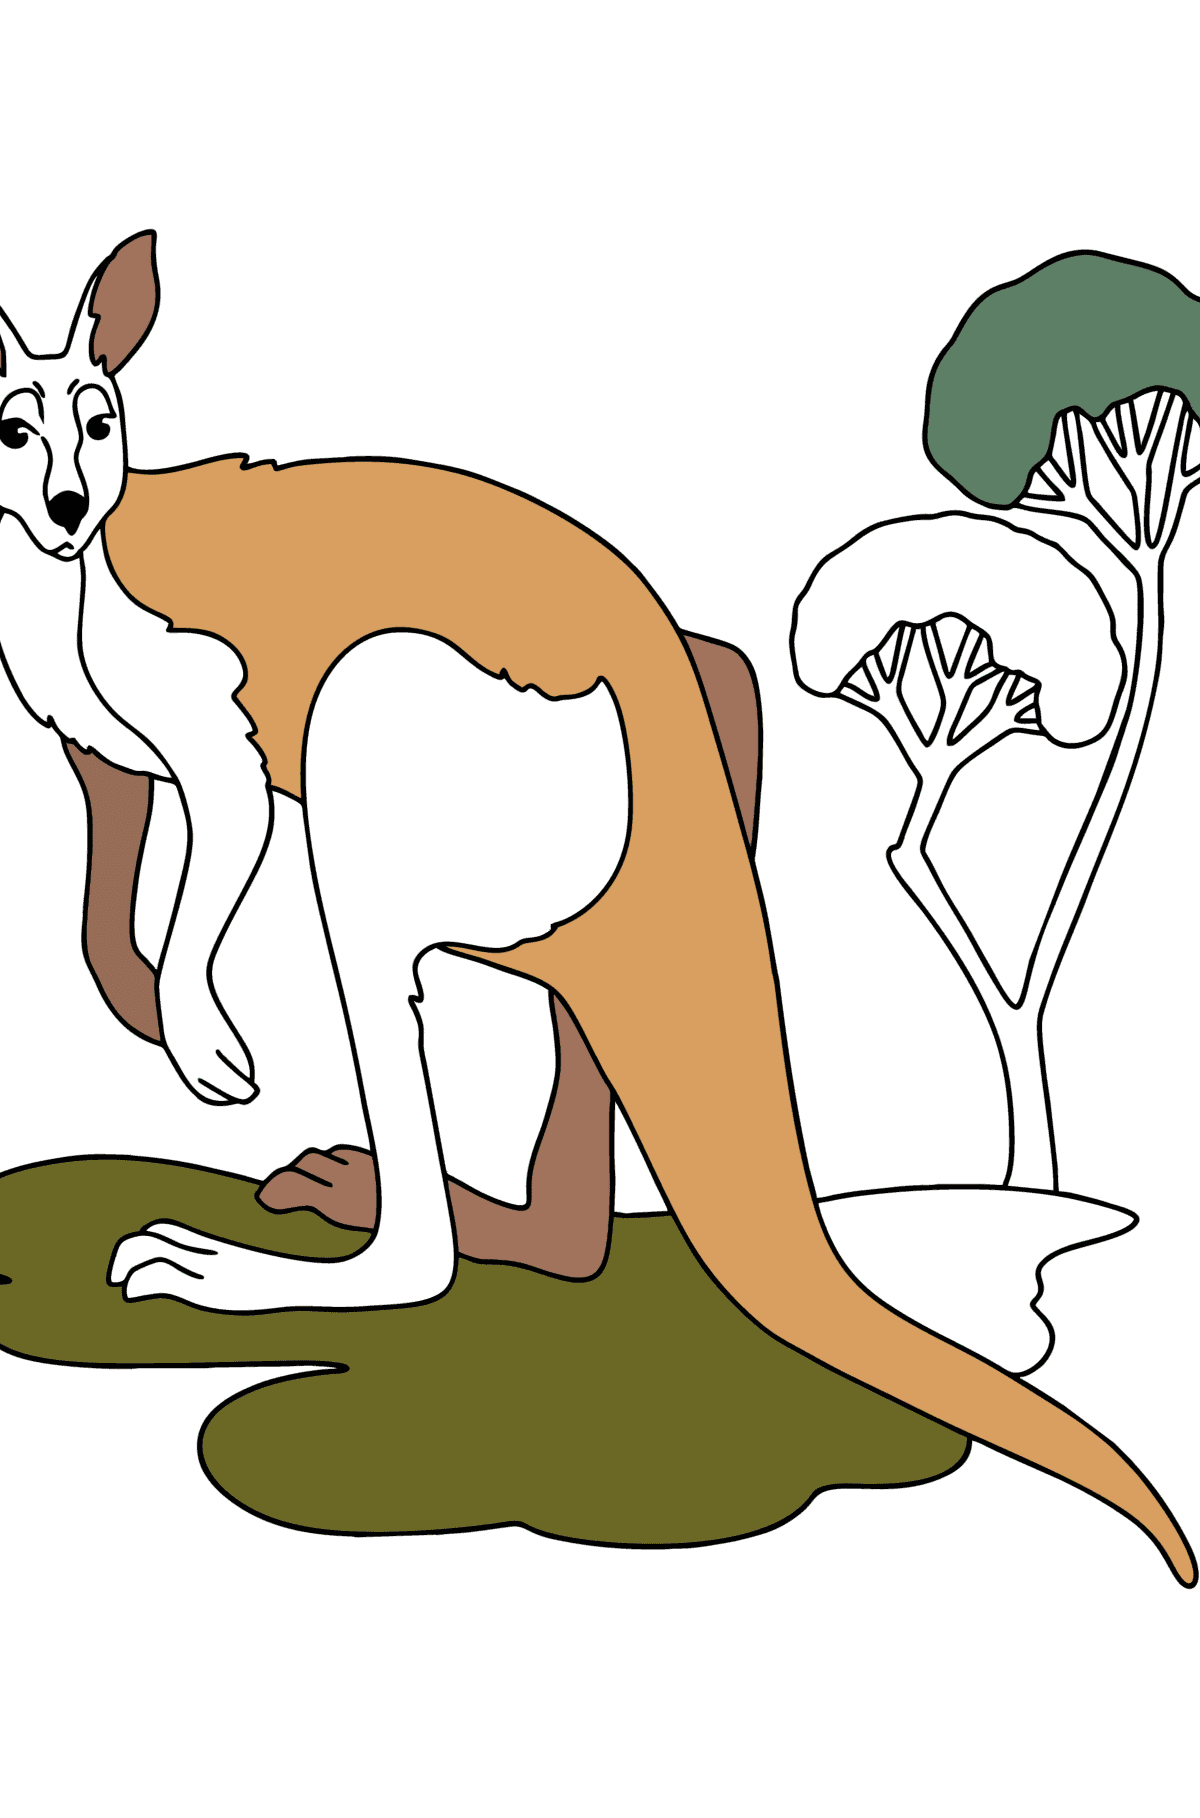 Kangaroo online coloring page - Coloring Pages for Kids